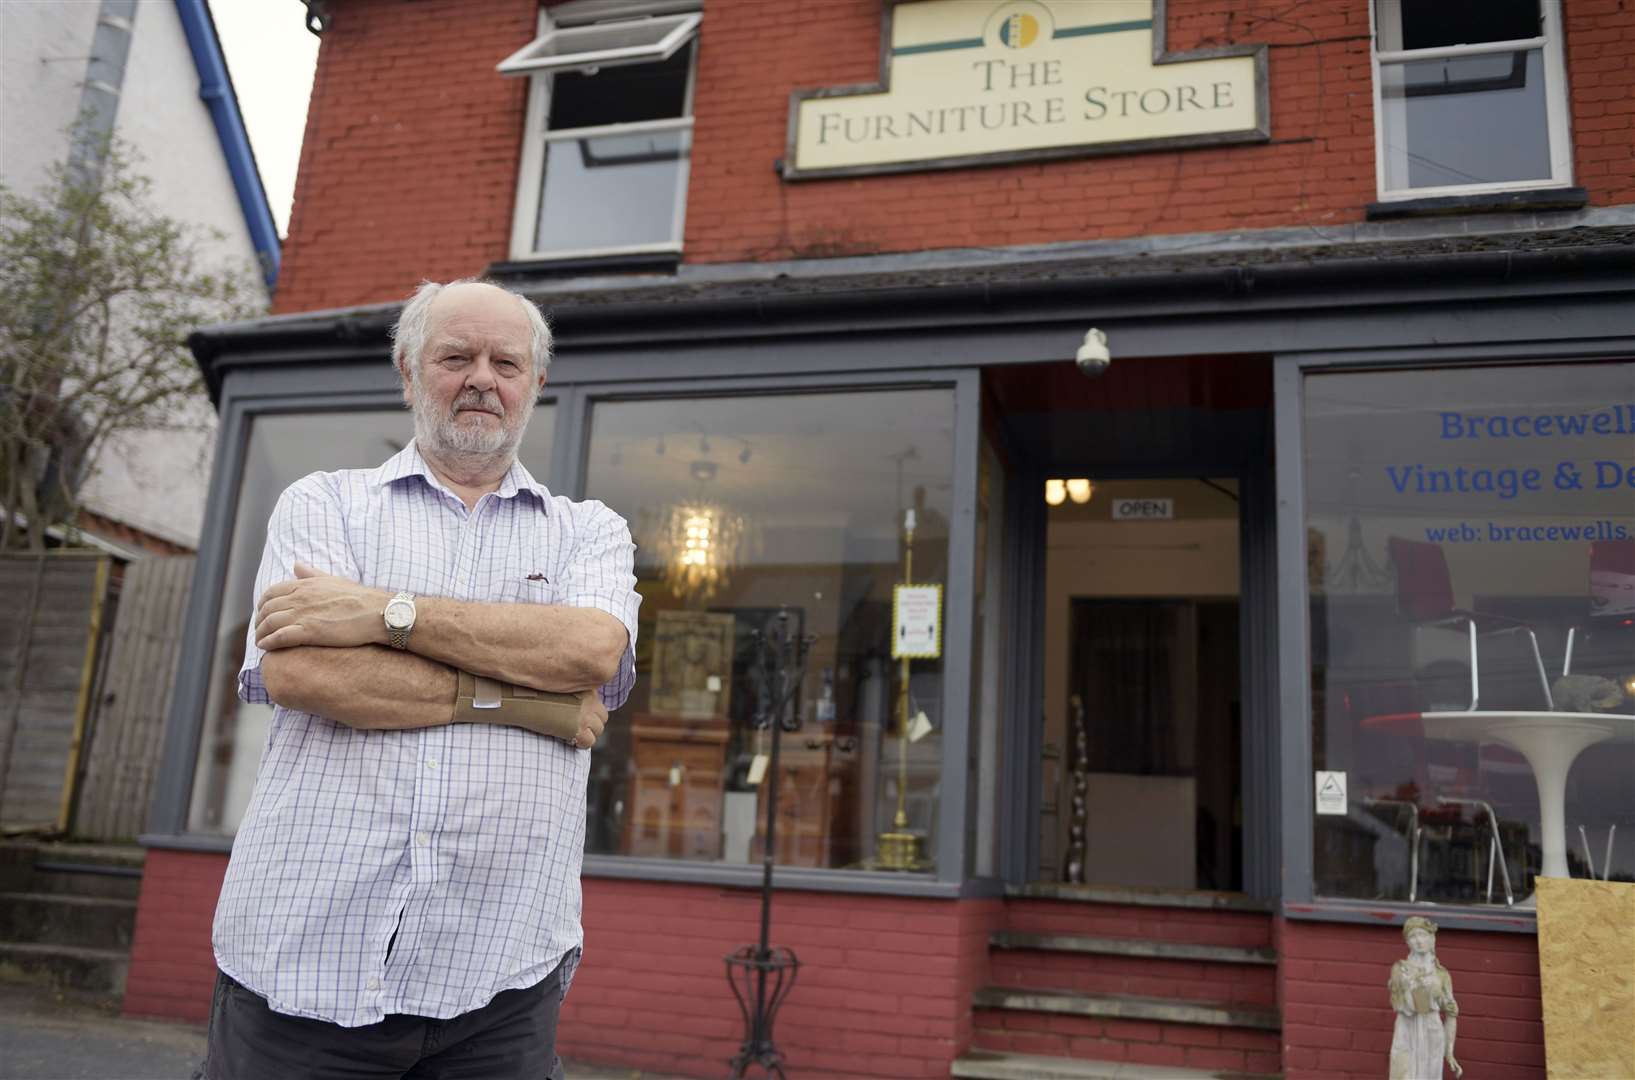 Owner David Bracewell outside his shop which police raided by mistake. Picture: Barry Goodwin